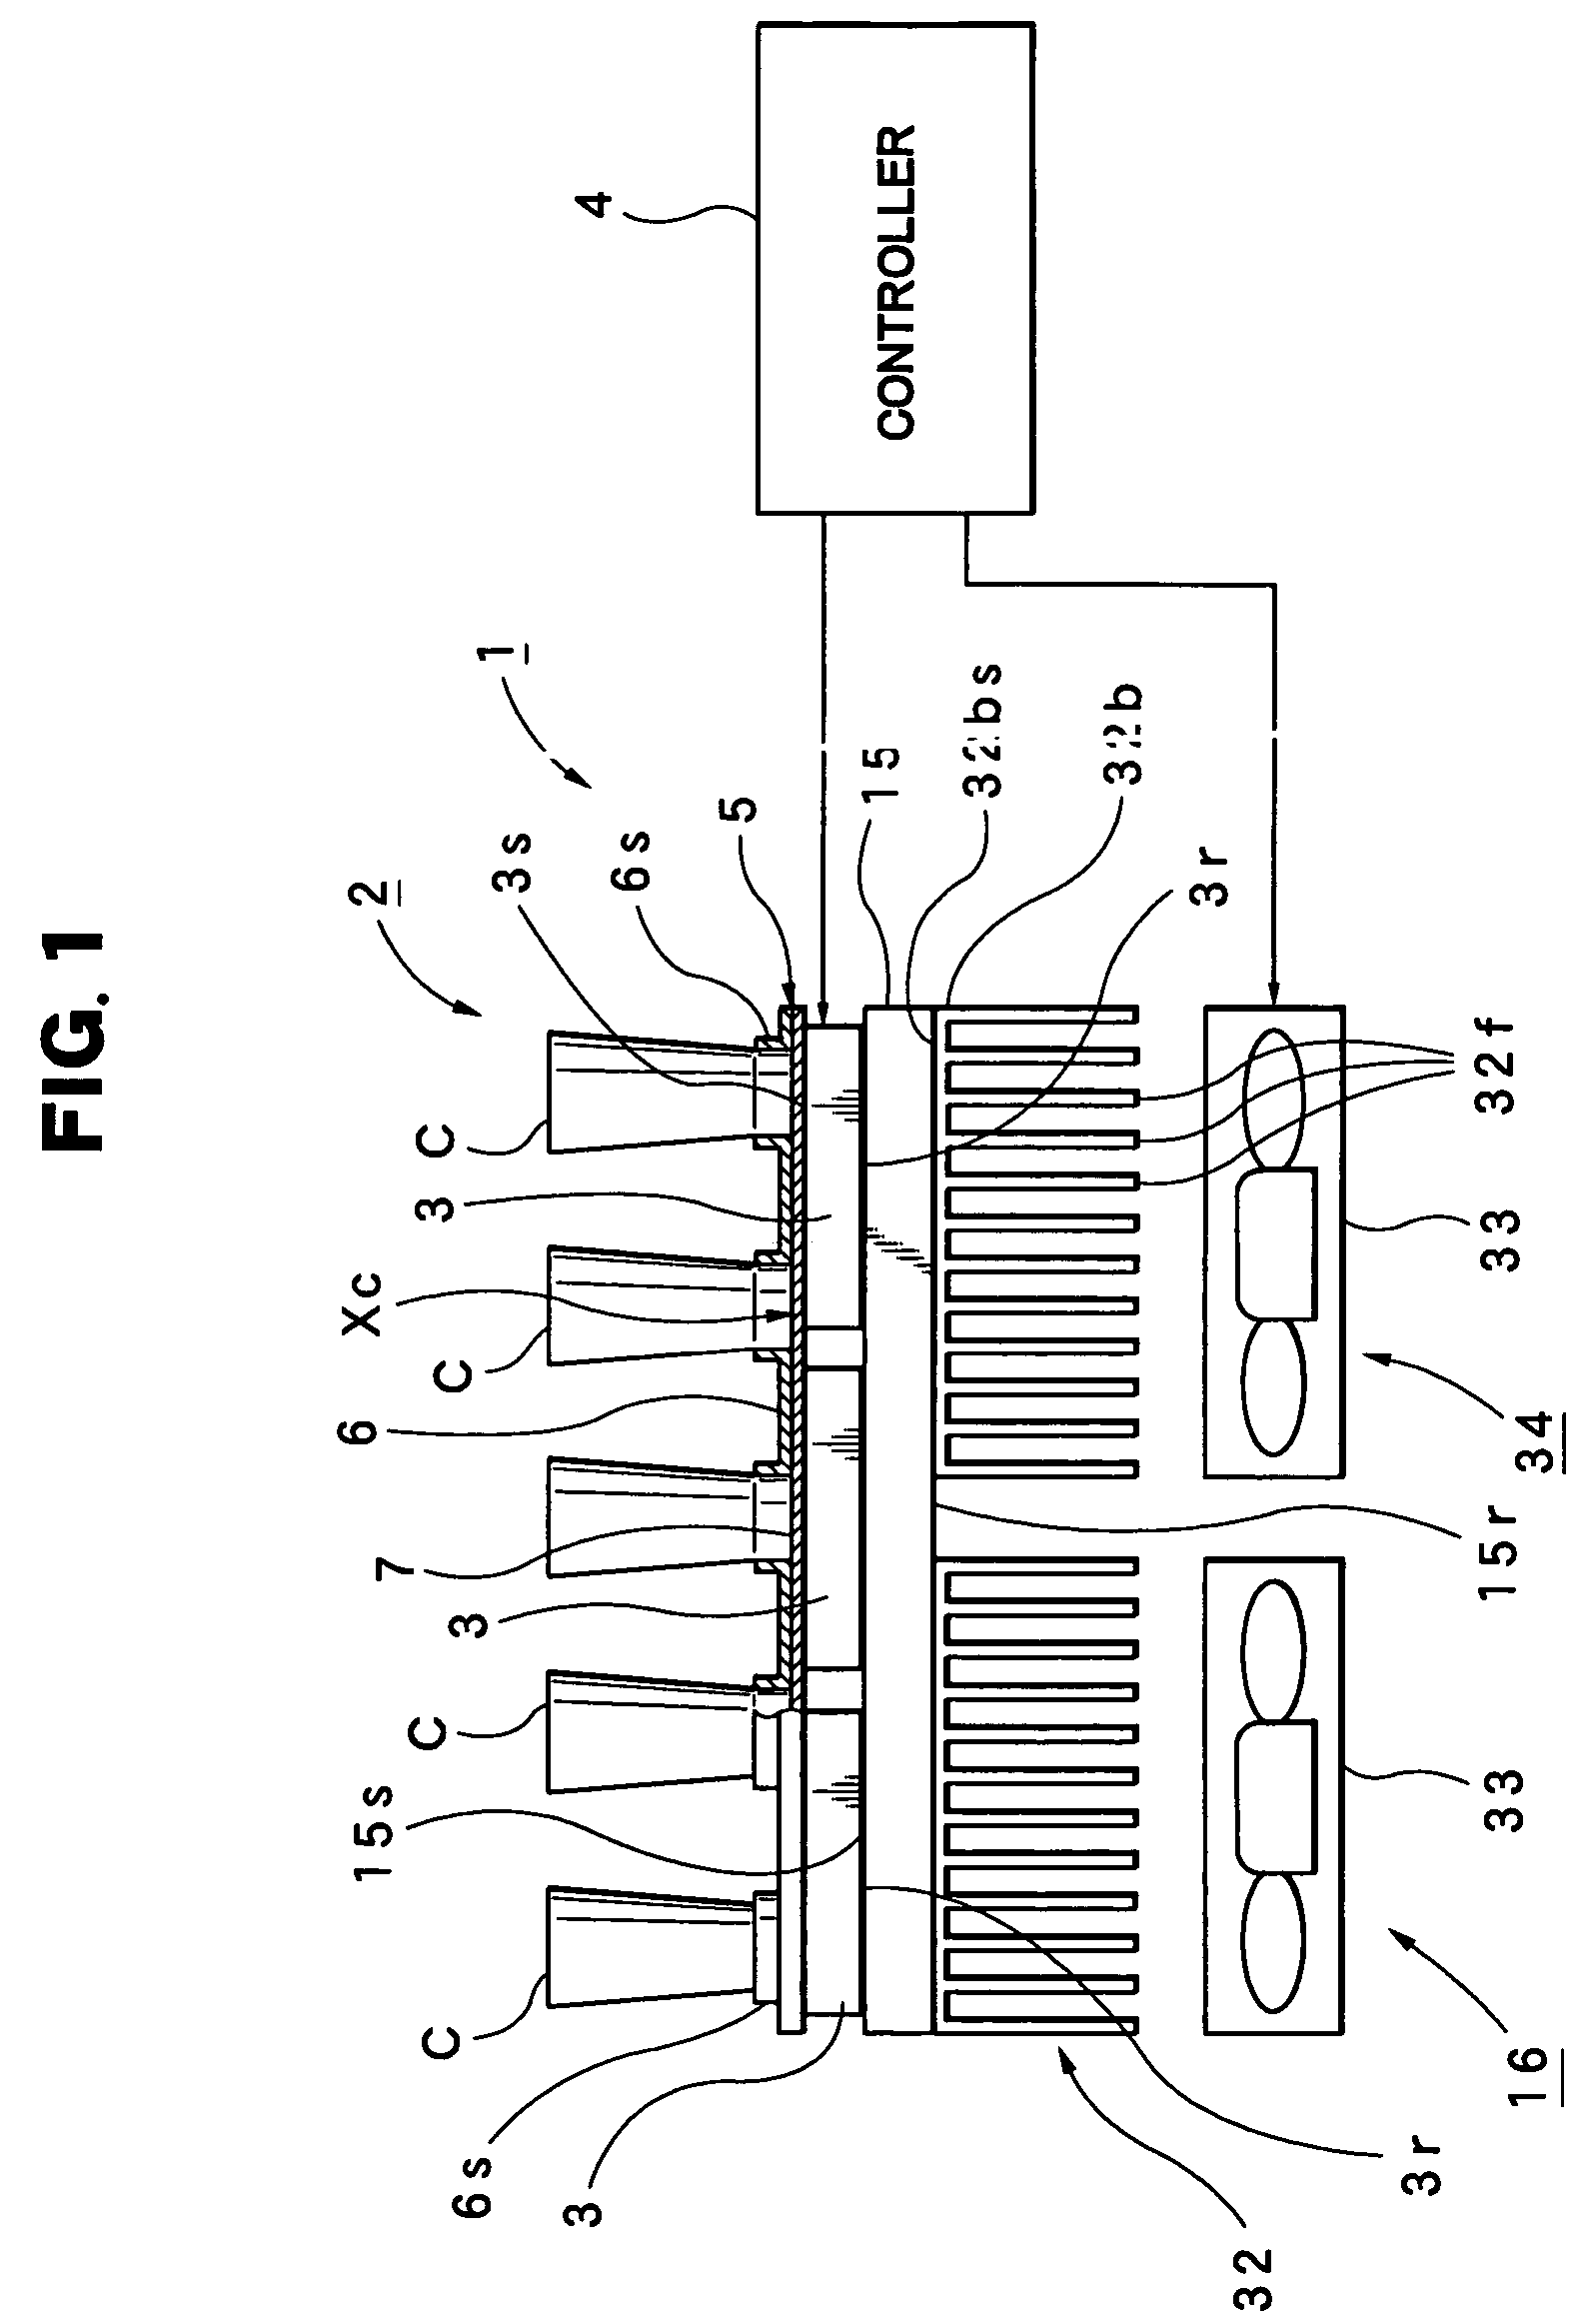 DNA amplification device